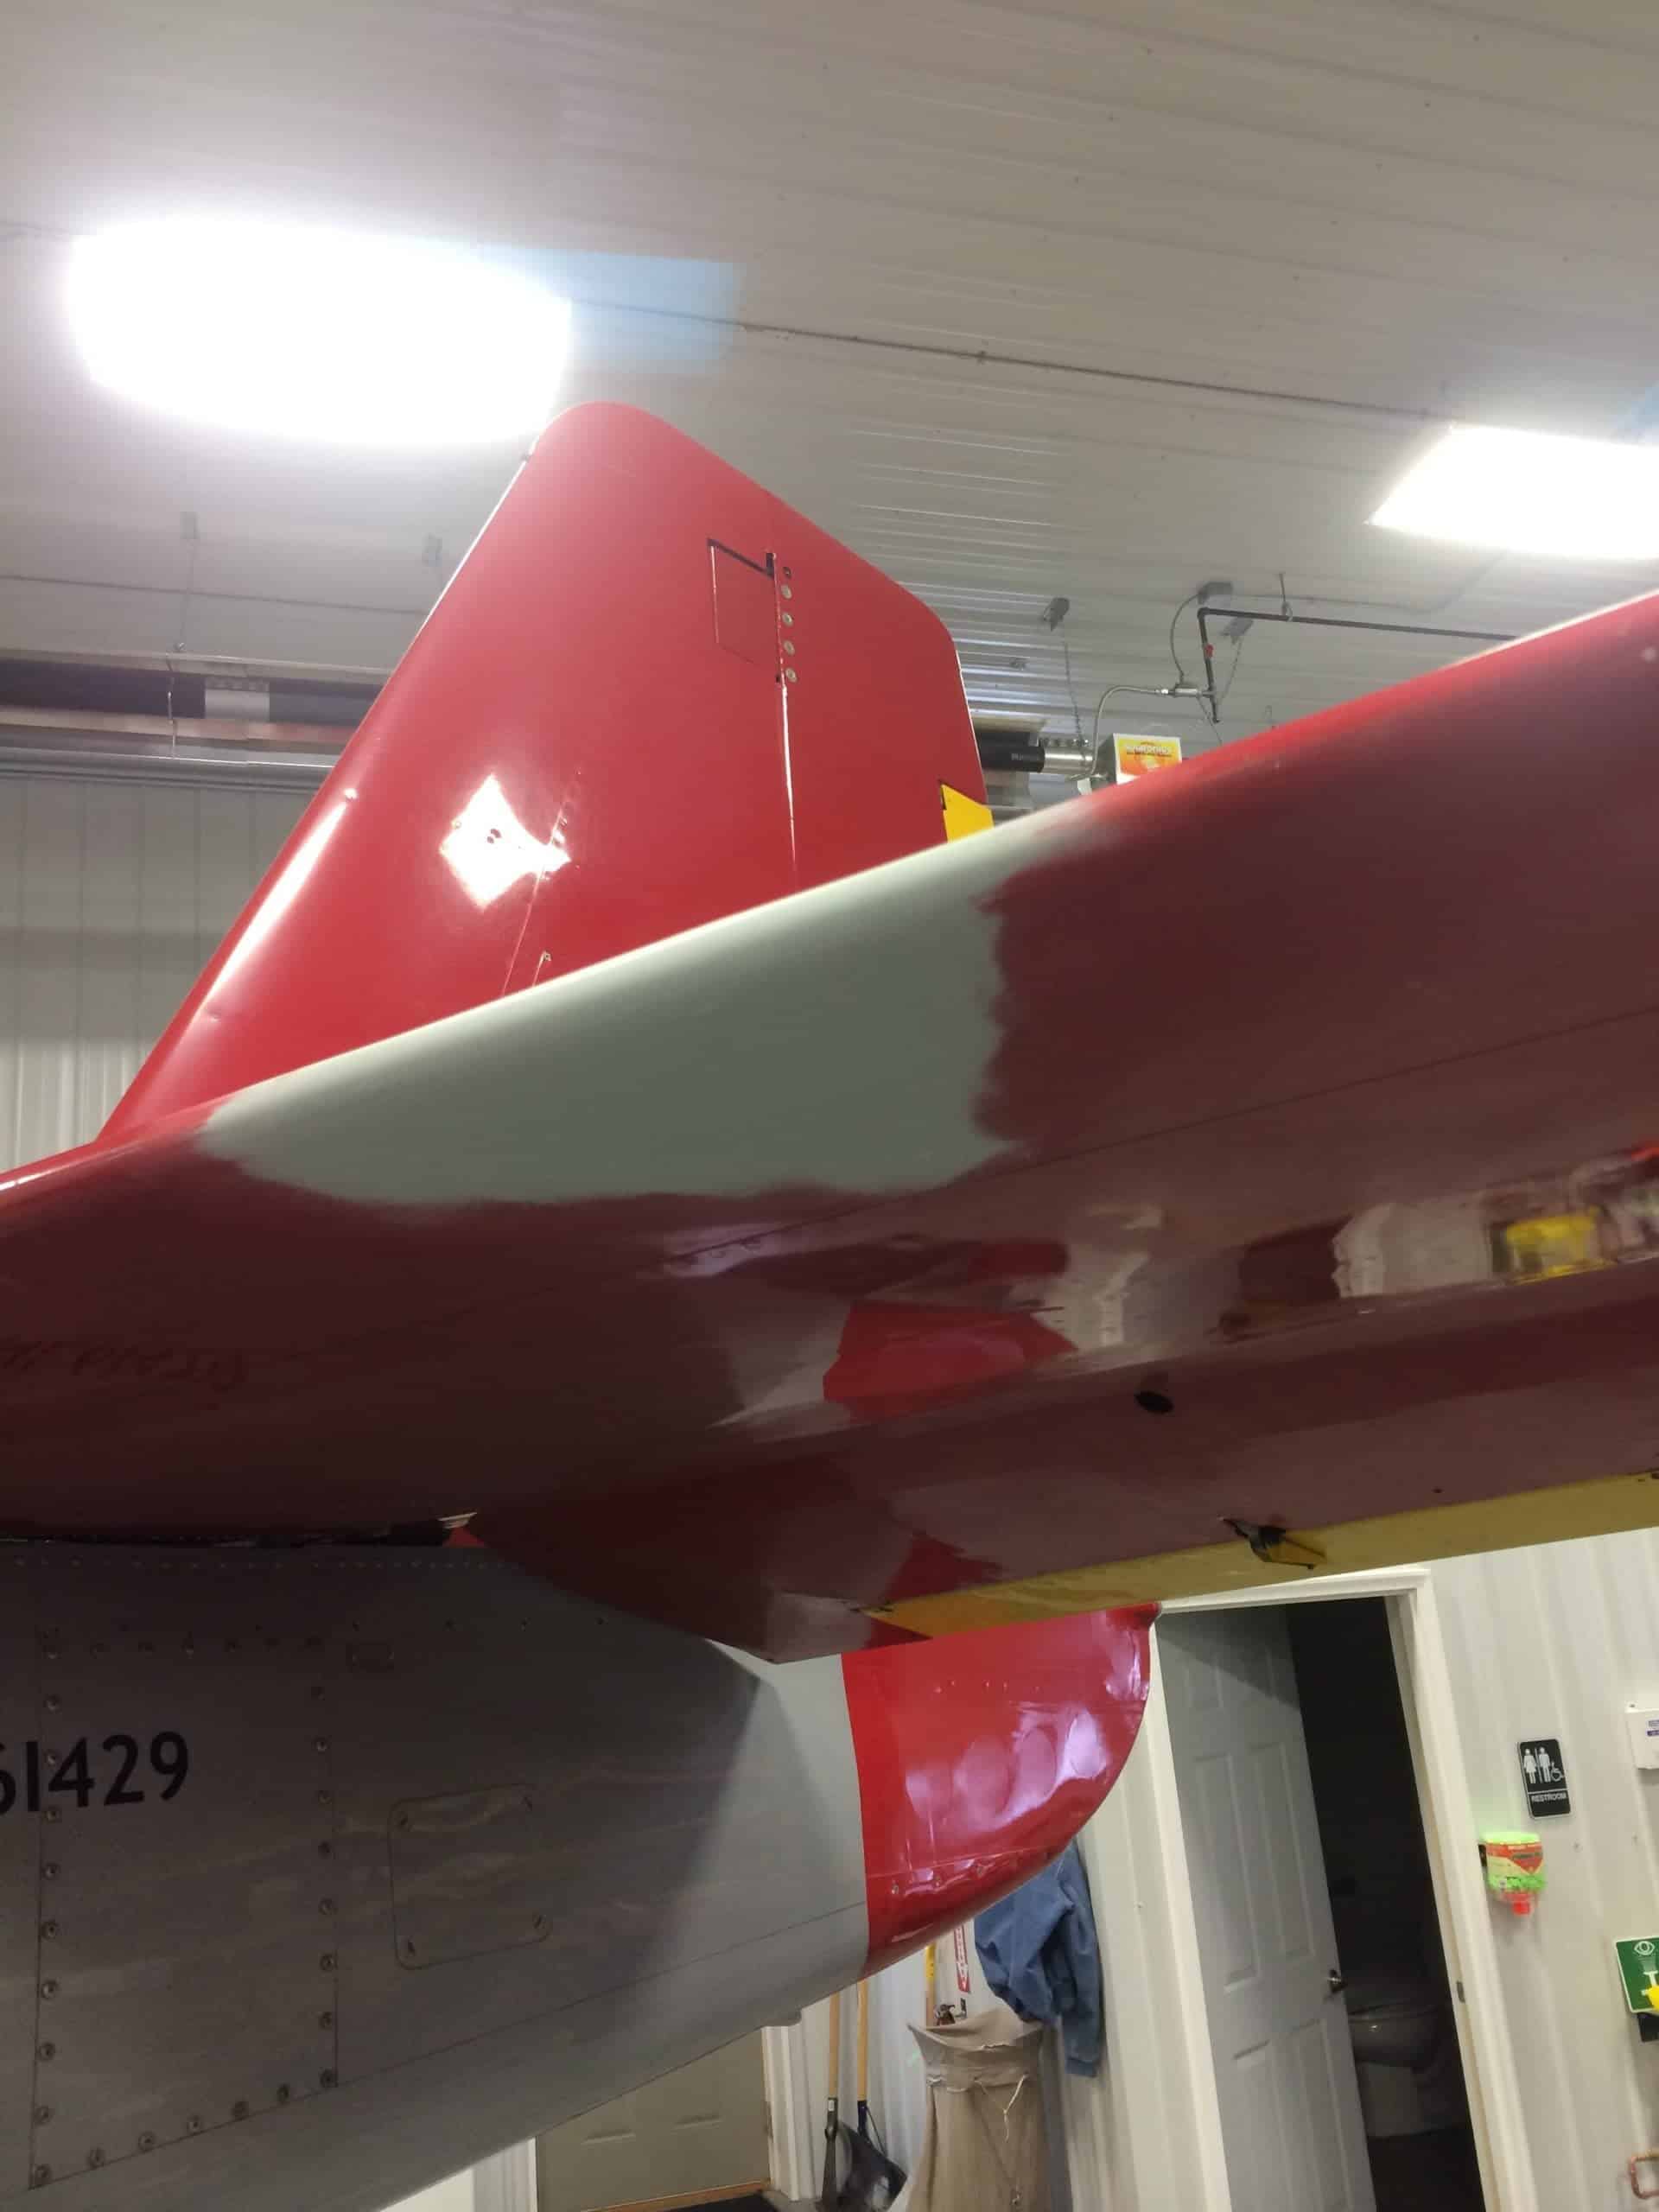 Bird strike repair is completed and ready for red paint.